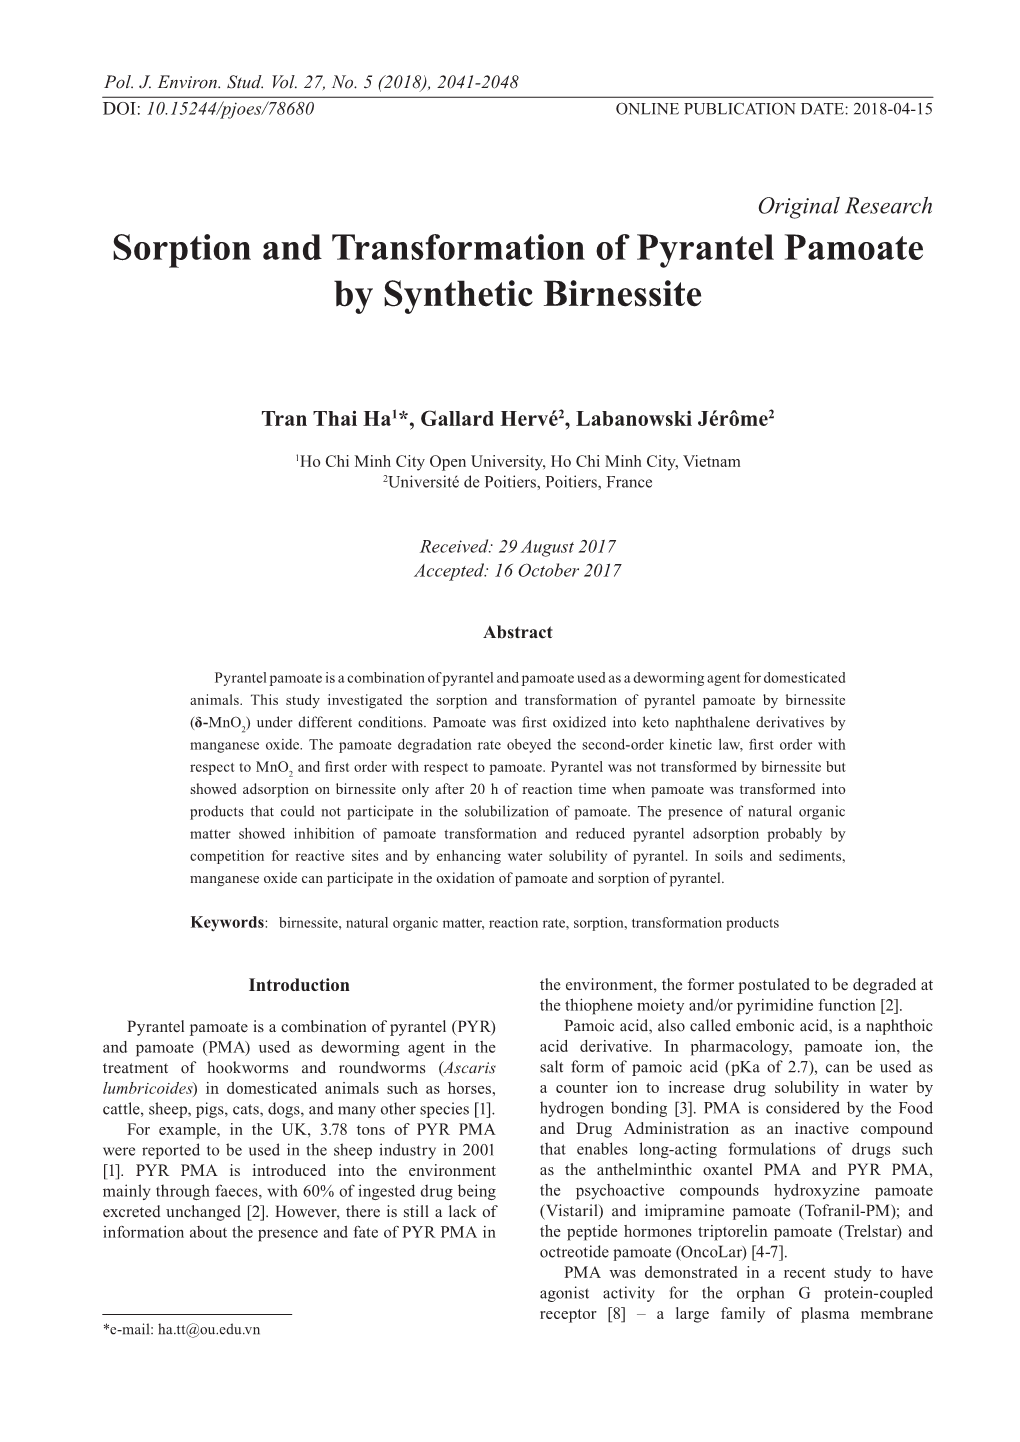 Sorption and Transformation of Pyrantel Pamoate by Synthetic Birnessite